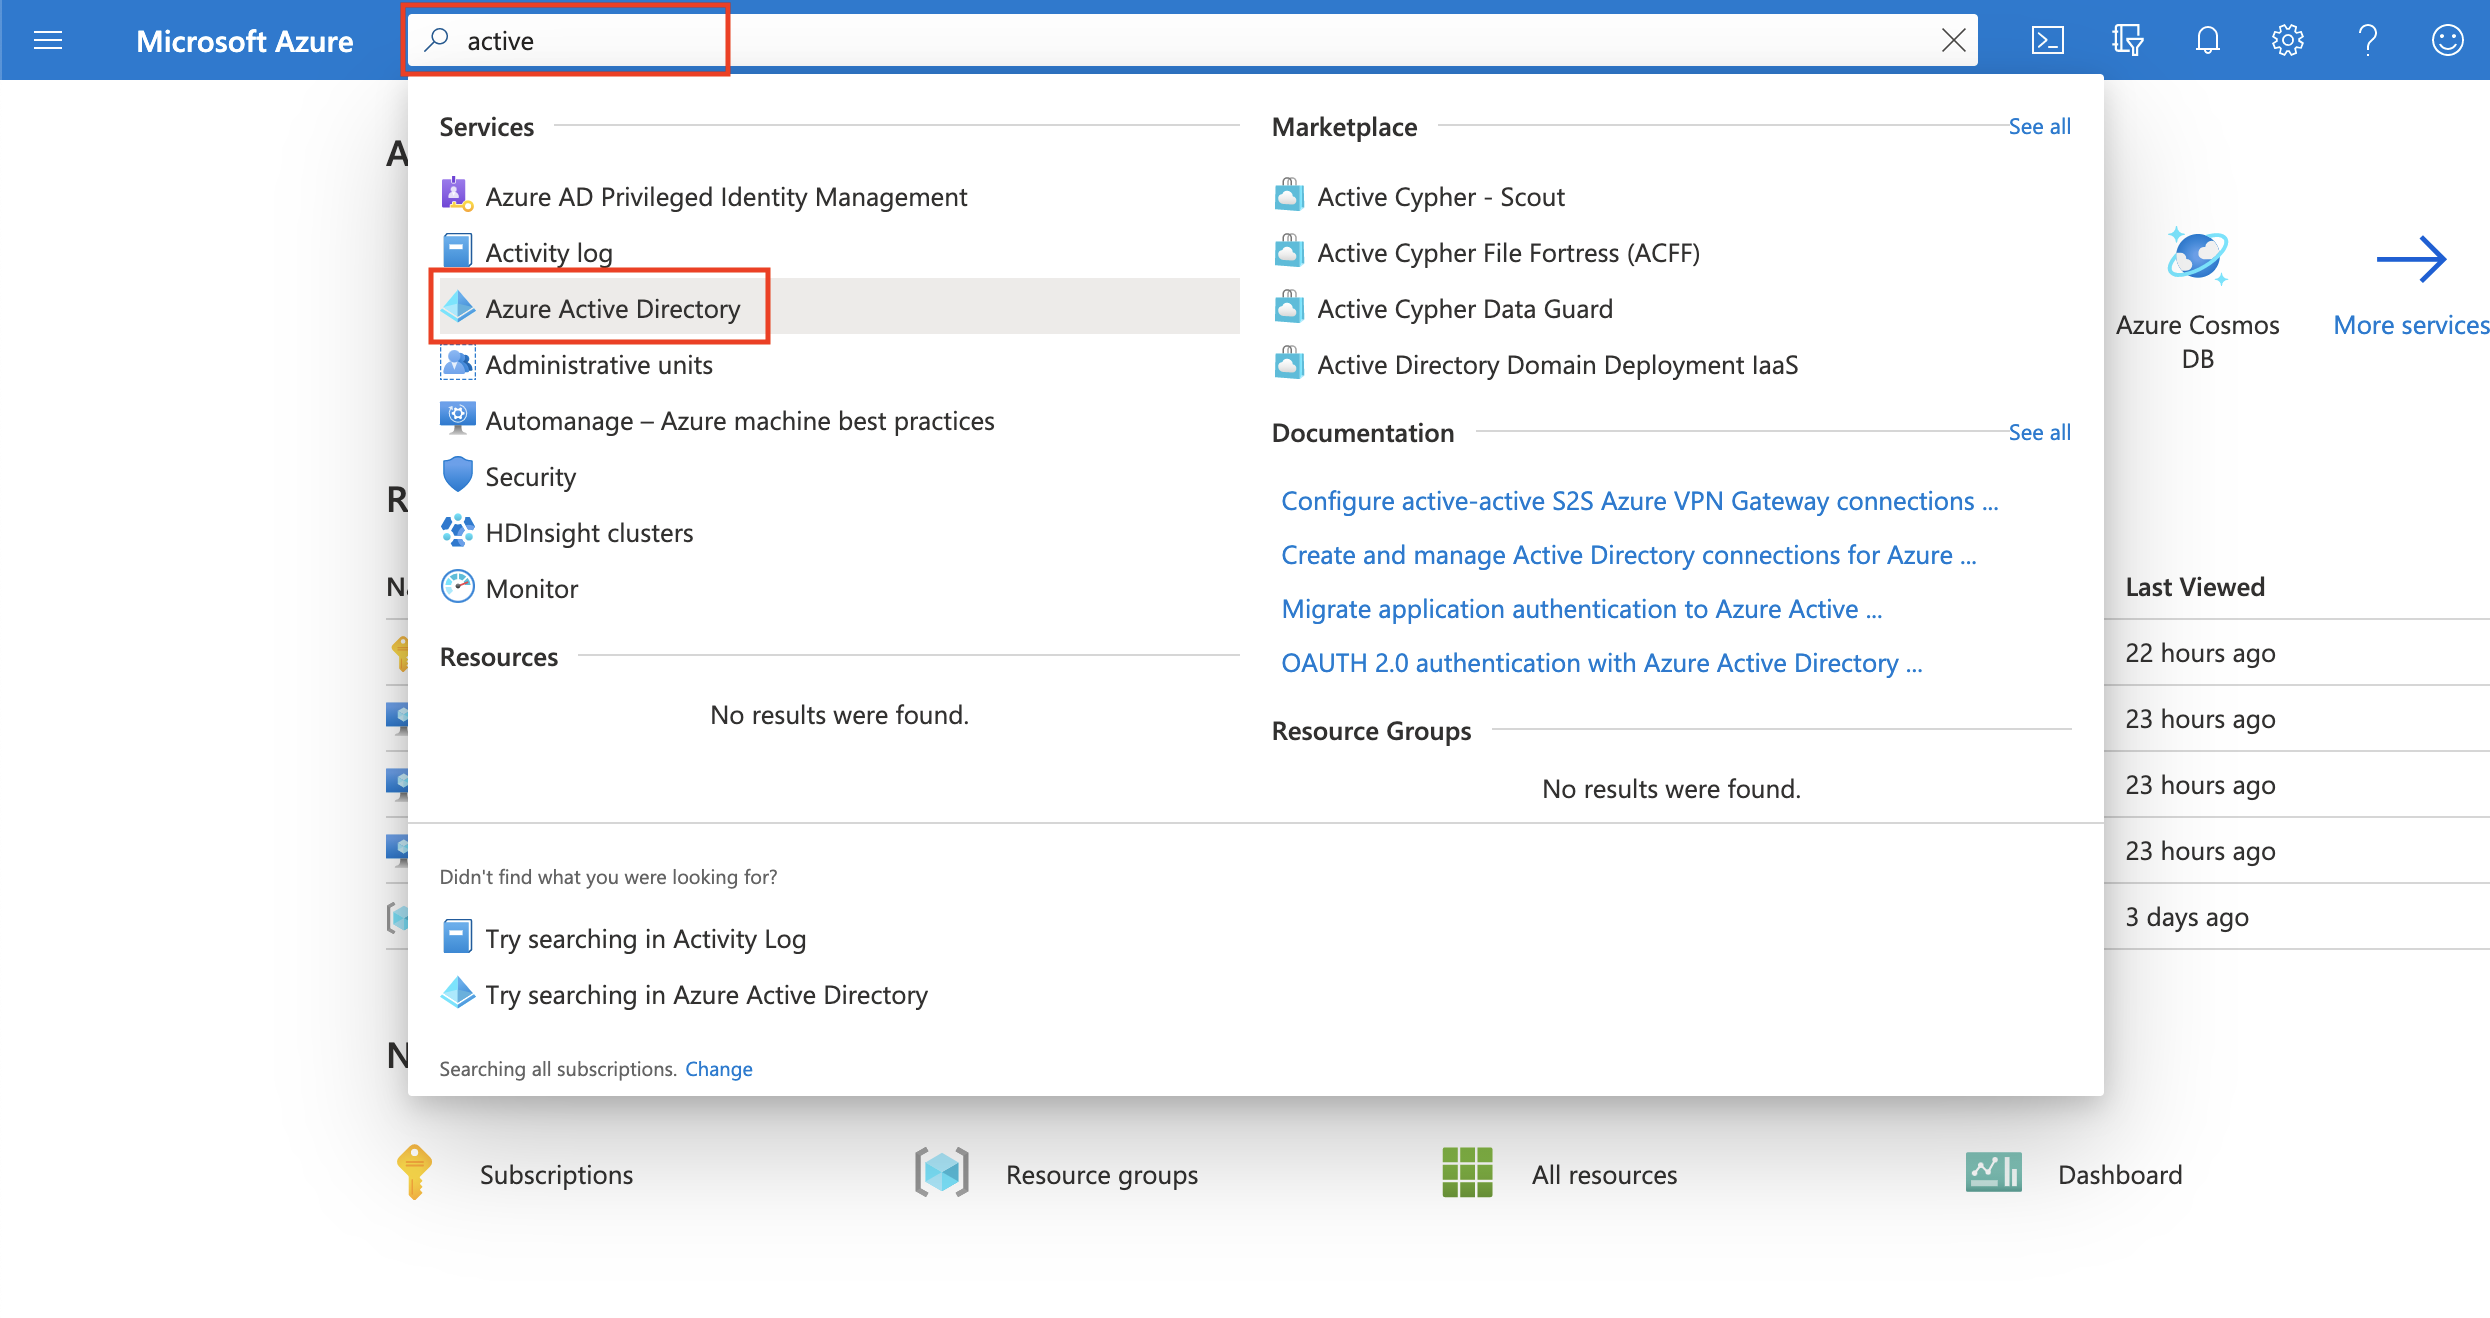 Search and click on Azure Active Directory